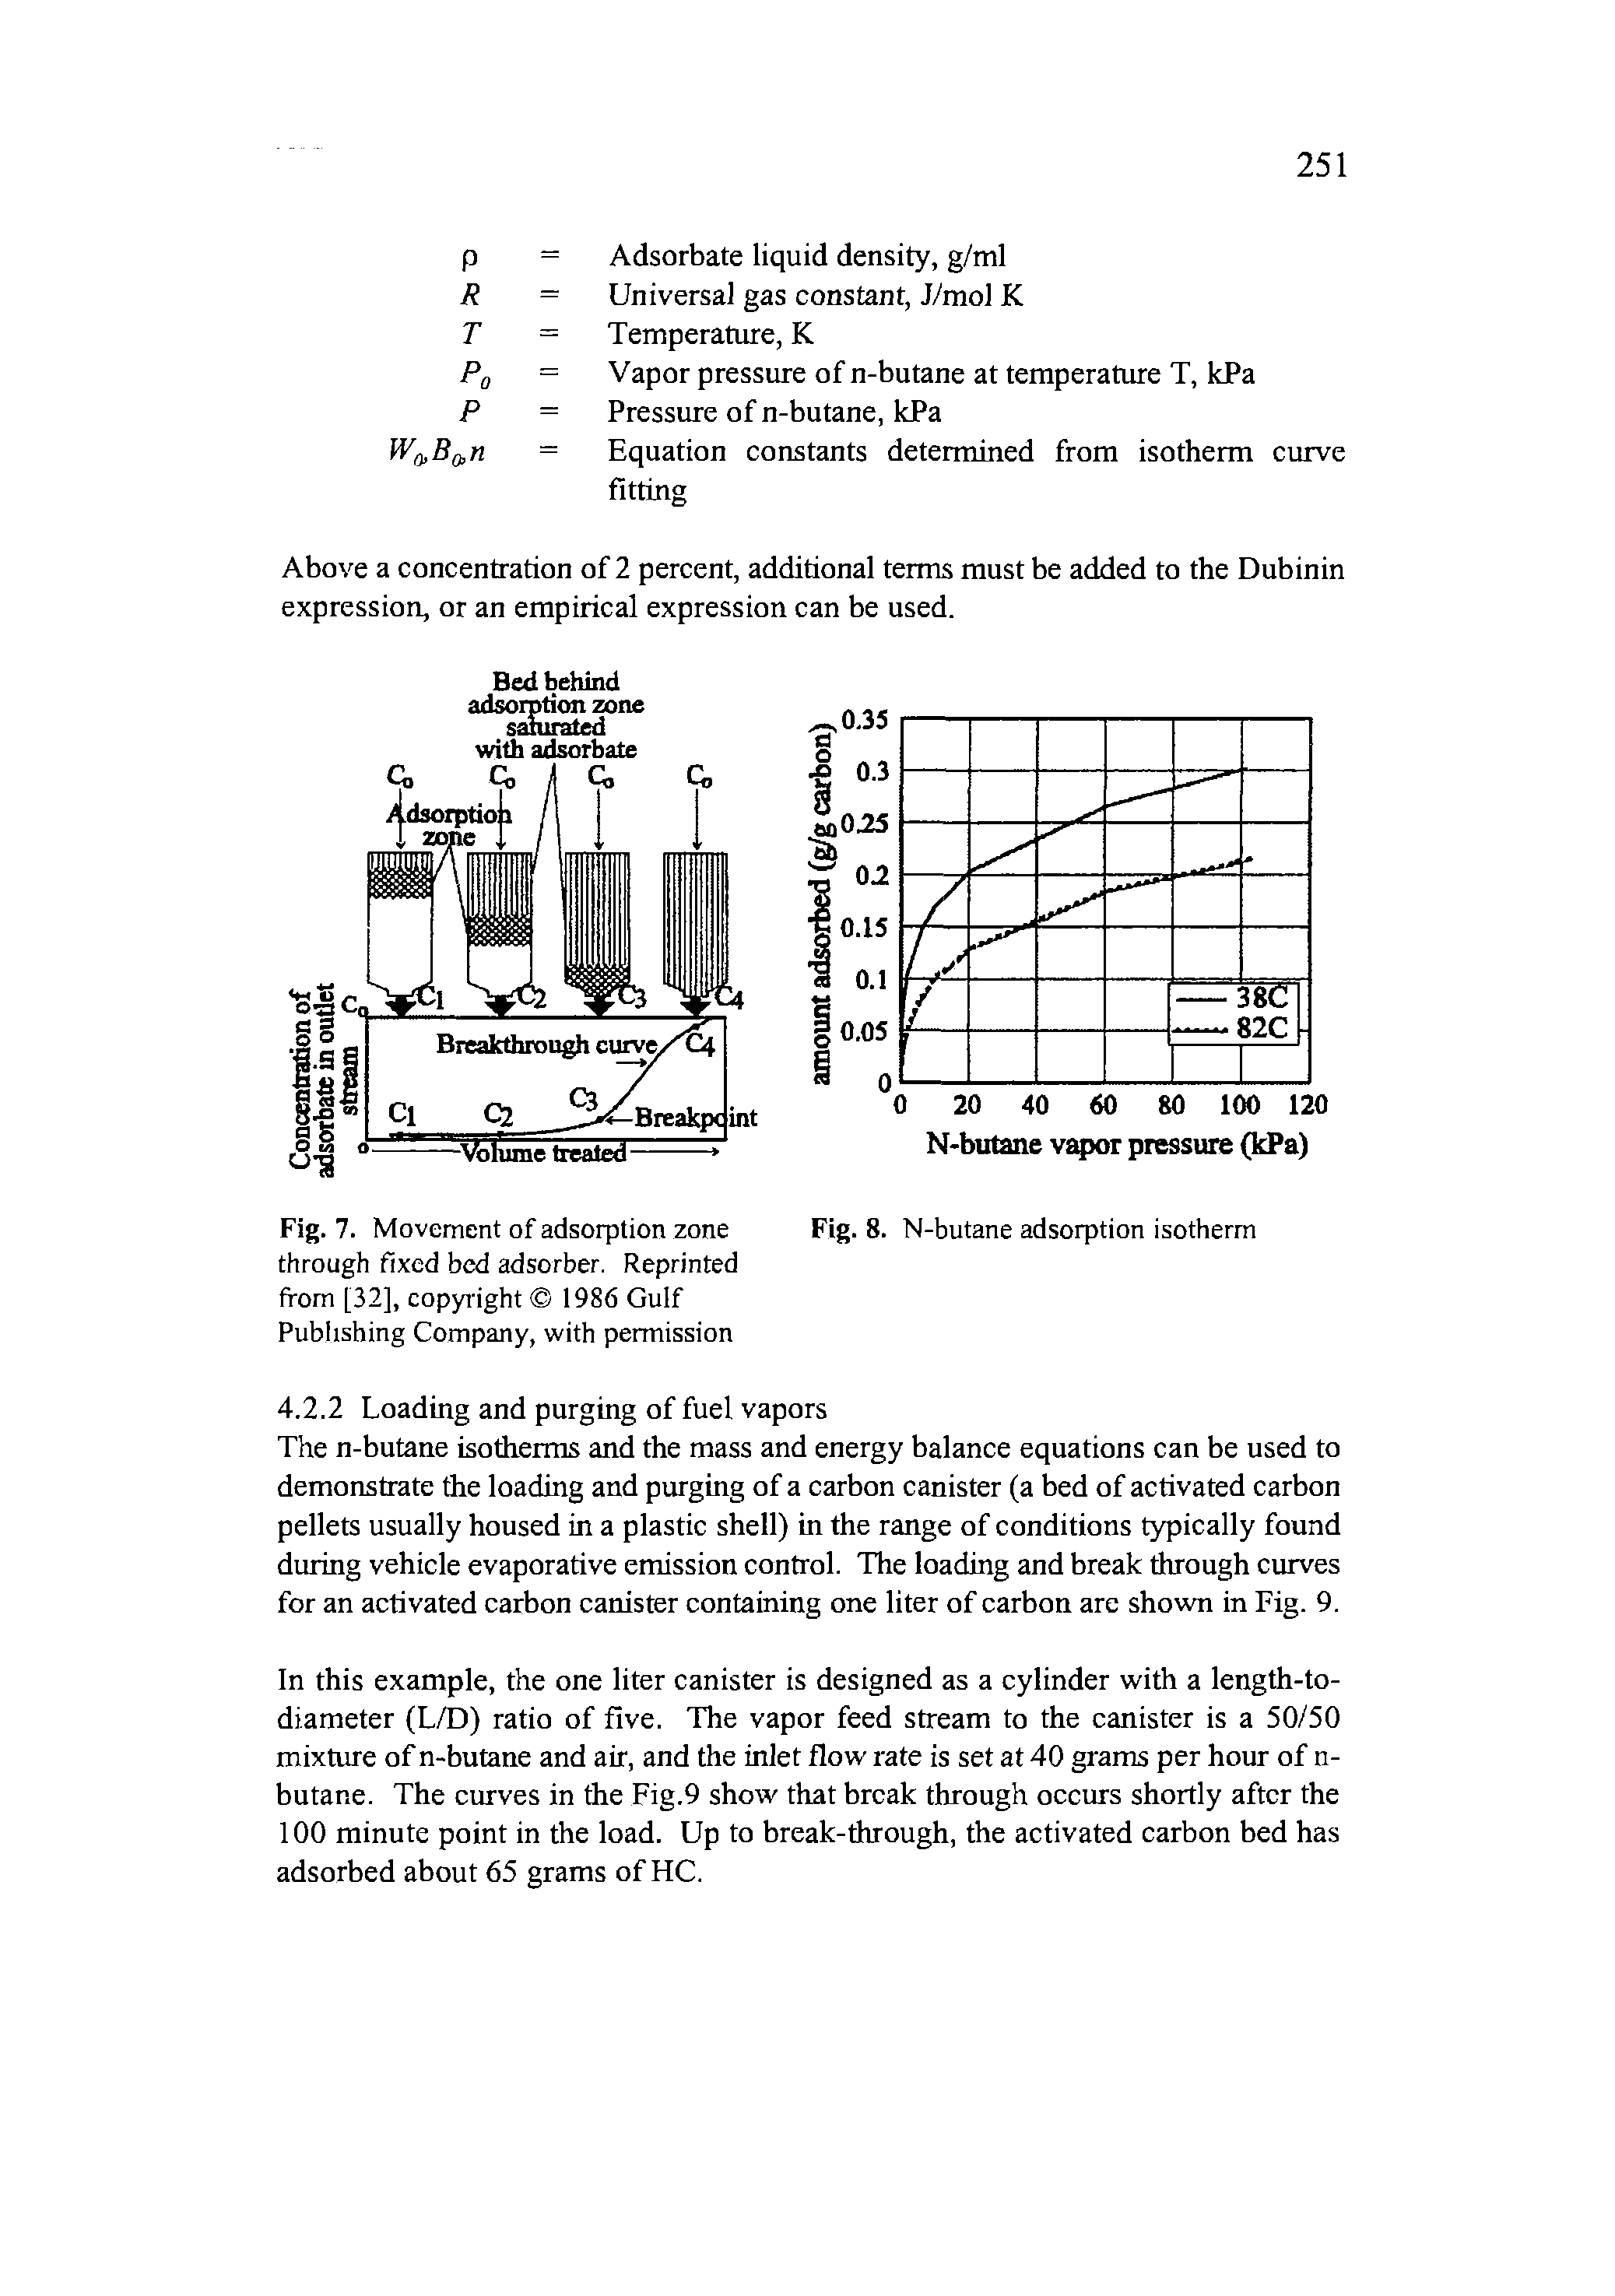 Fig. 7. Movement of adsorption zone through fixed bed adsorber. Reprinted from [32], copyright 1986 Gulf Publishing Company, with permission...